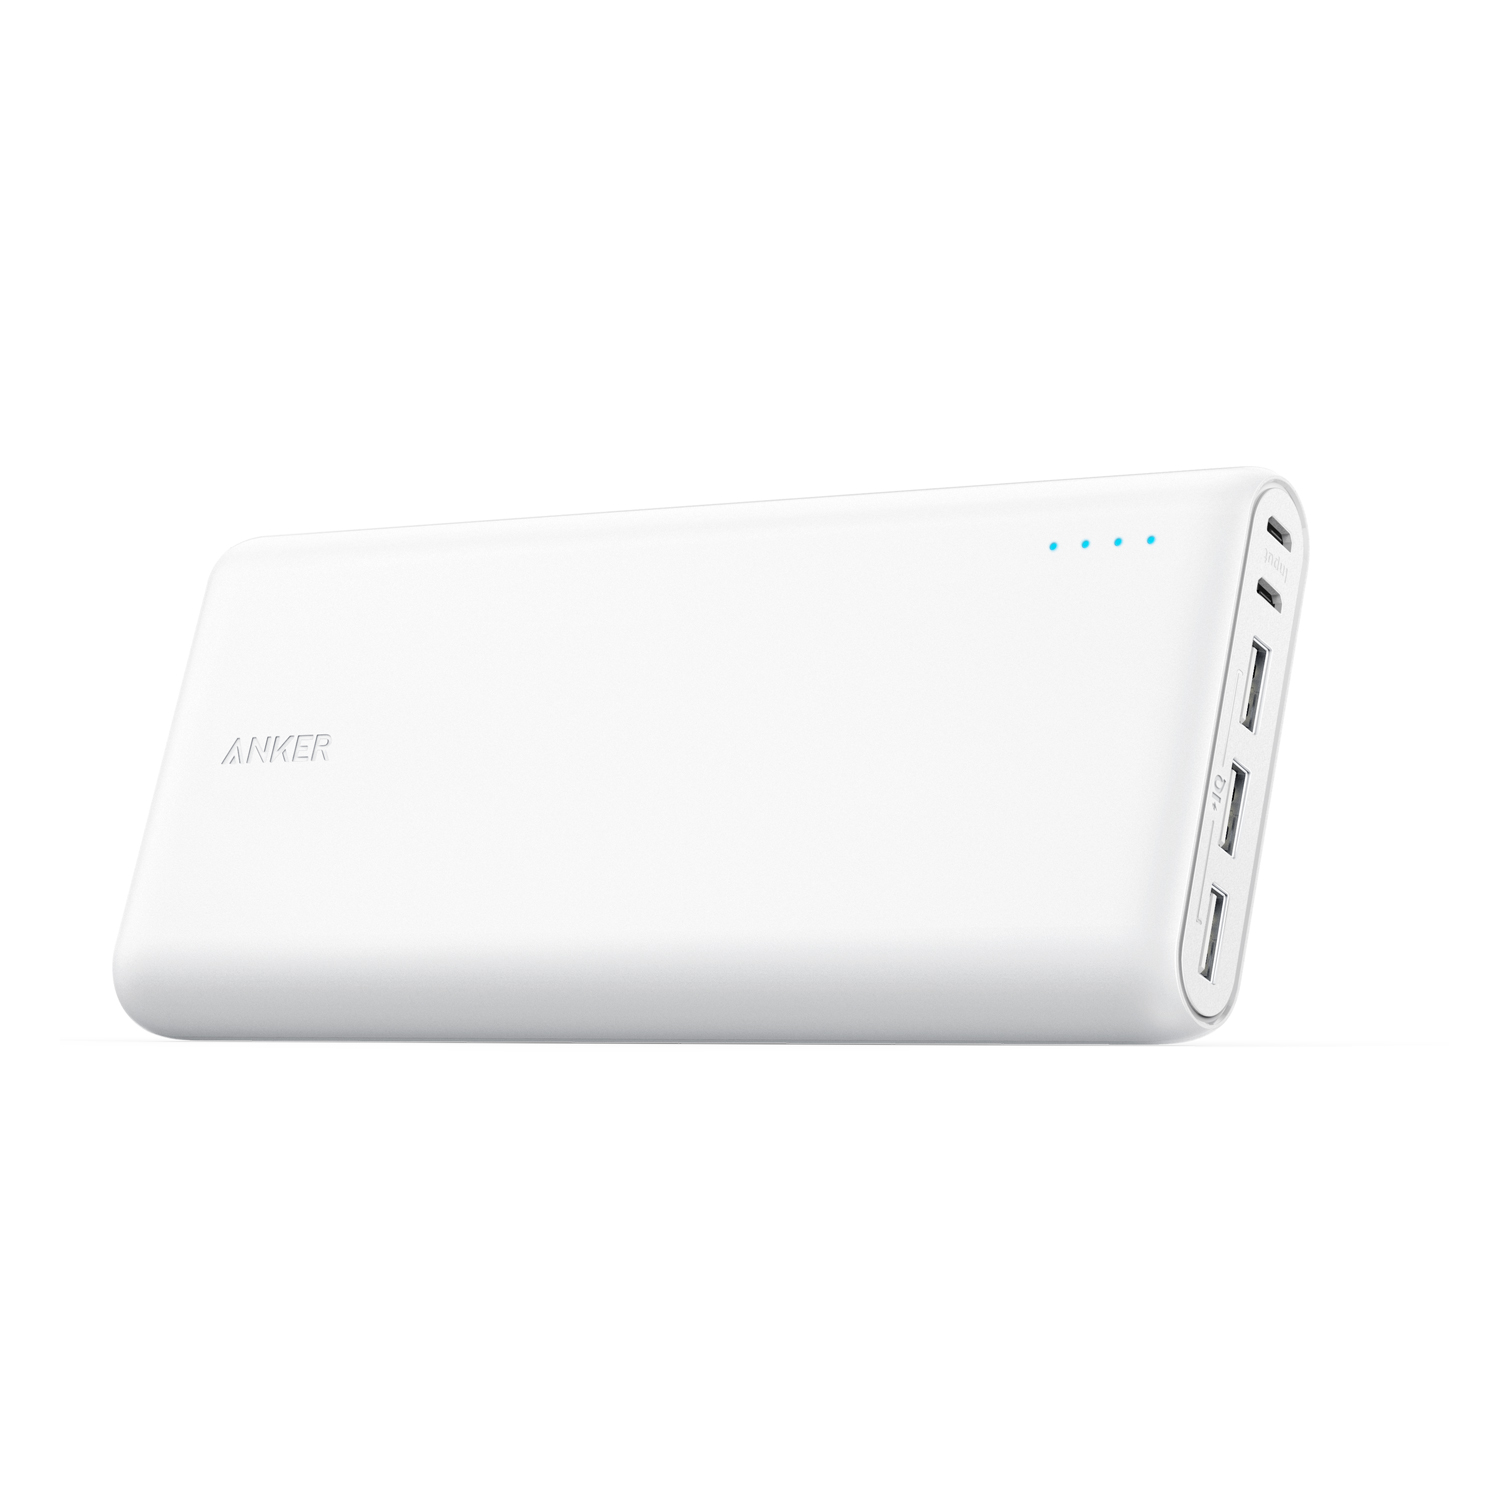 Anker 26800mAh Portable Charger,PowerCore 26800 Power Bank Battery Pack 3 USB Ports| White - image 1 of 7